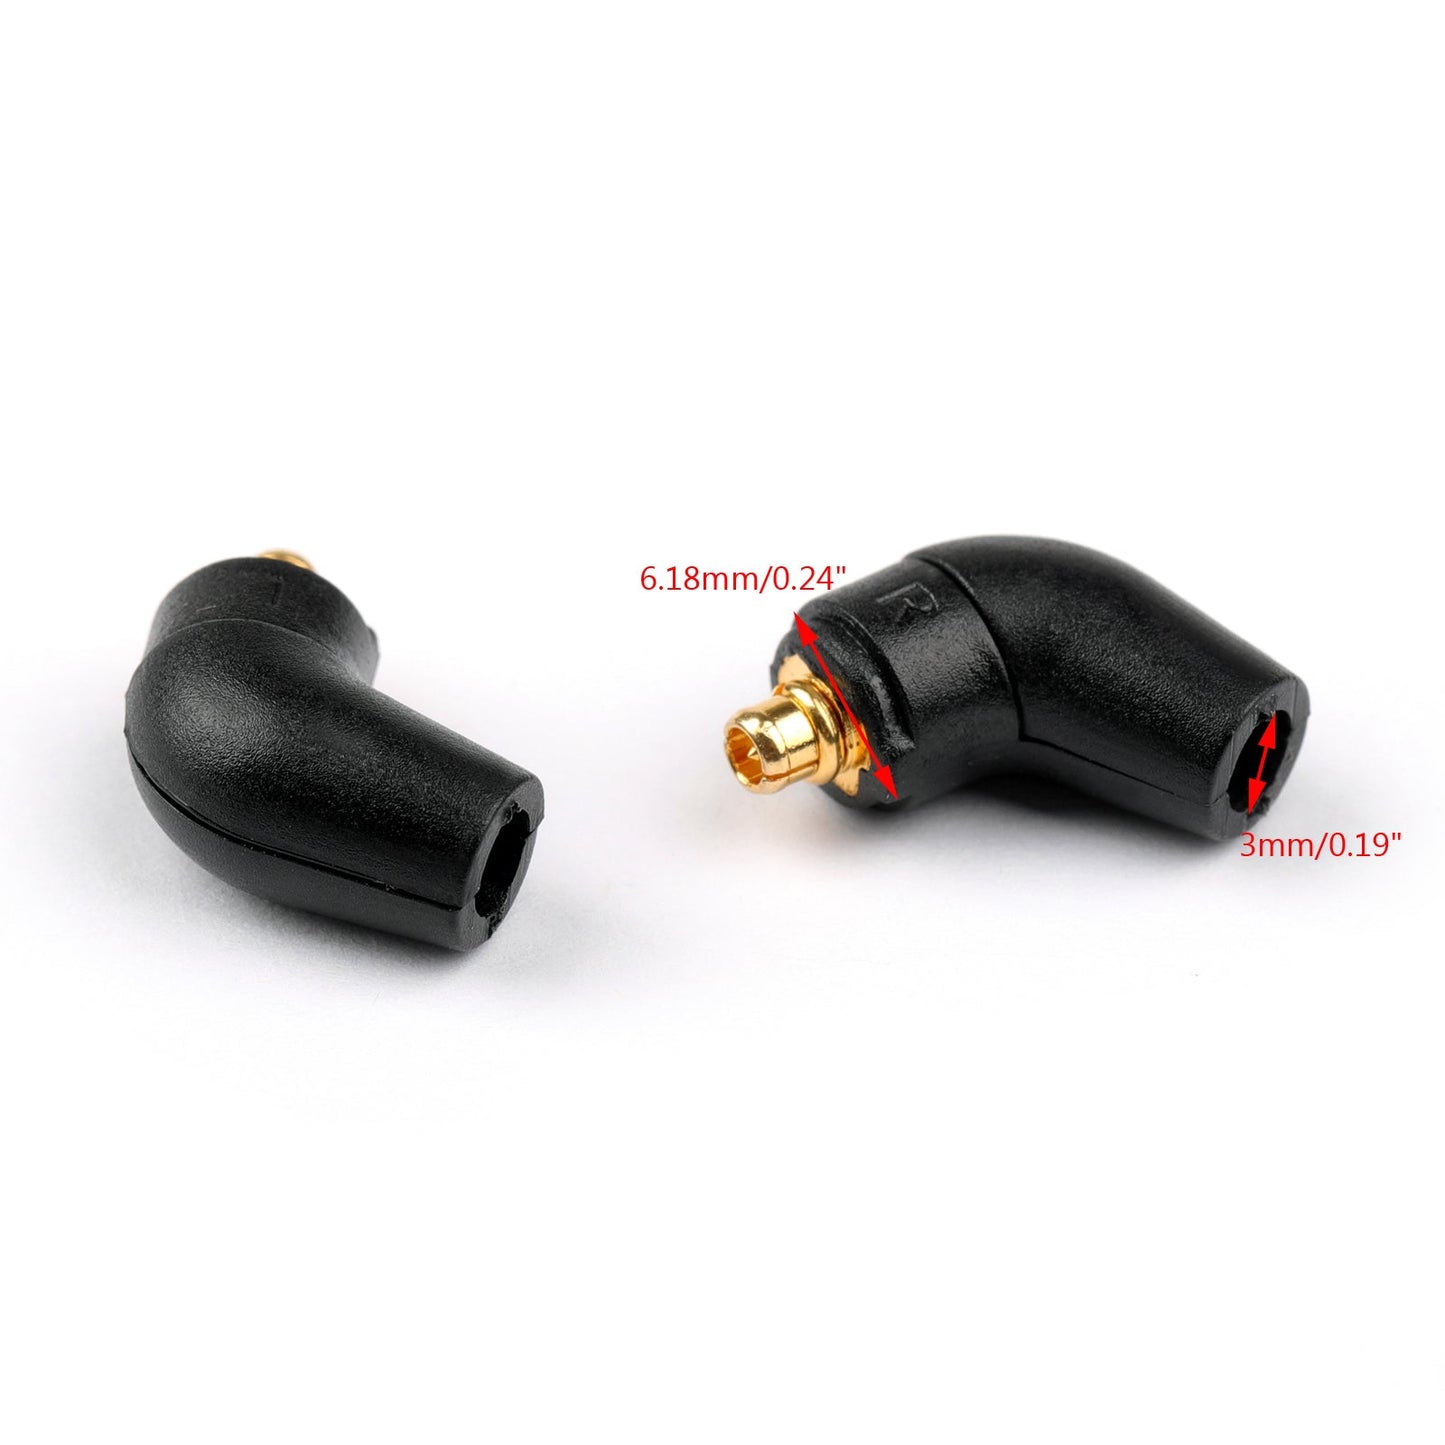 1Pair For Etymotic SE315 SE535 UE900 Earphone Cable Pin Connector Plug Black